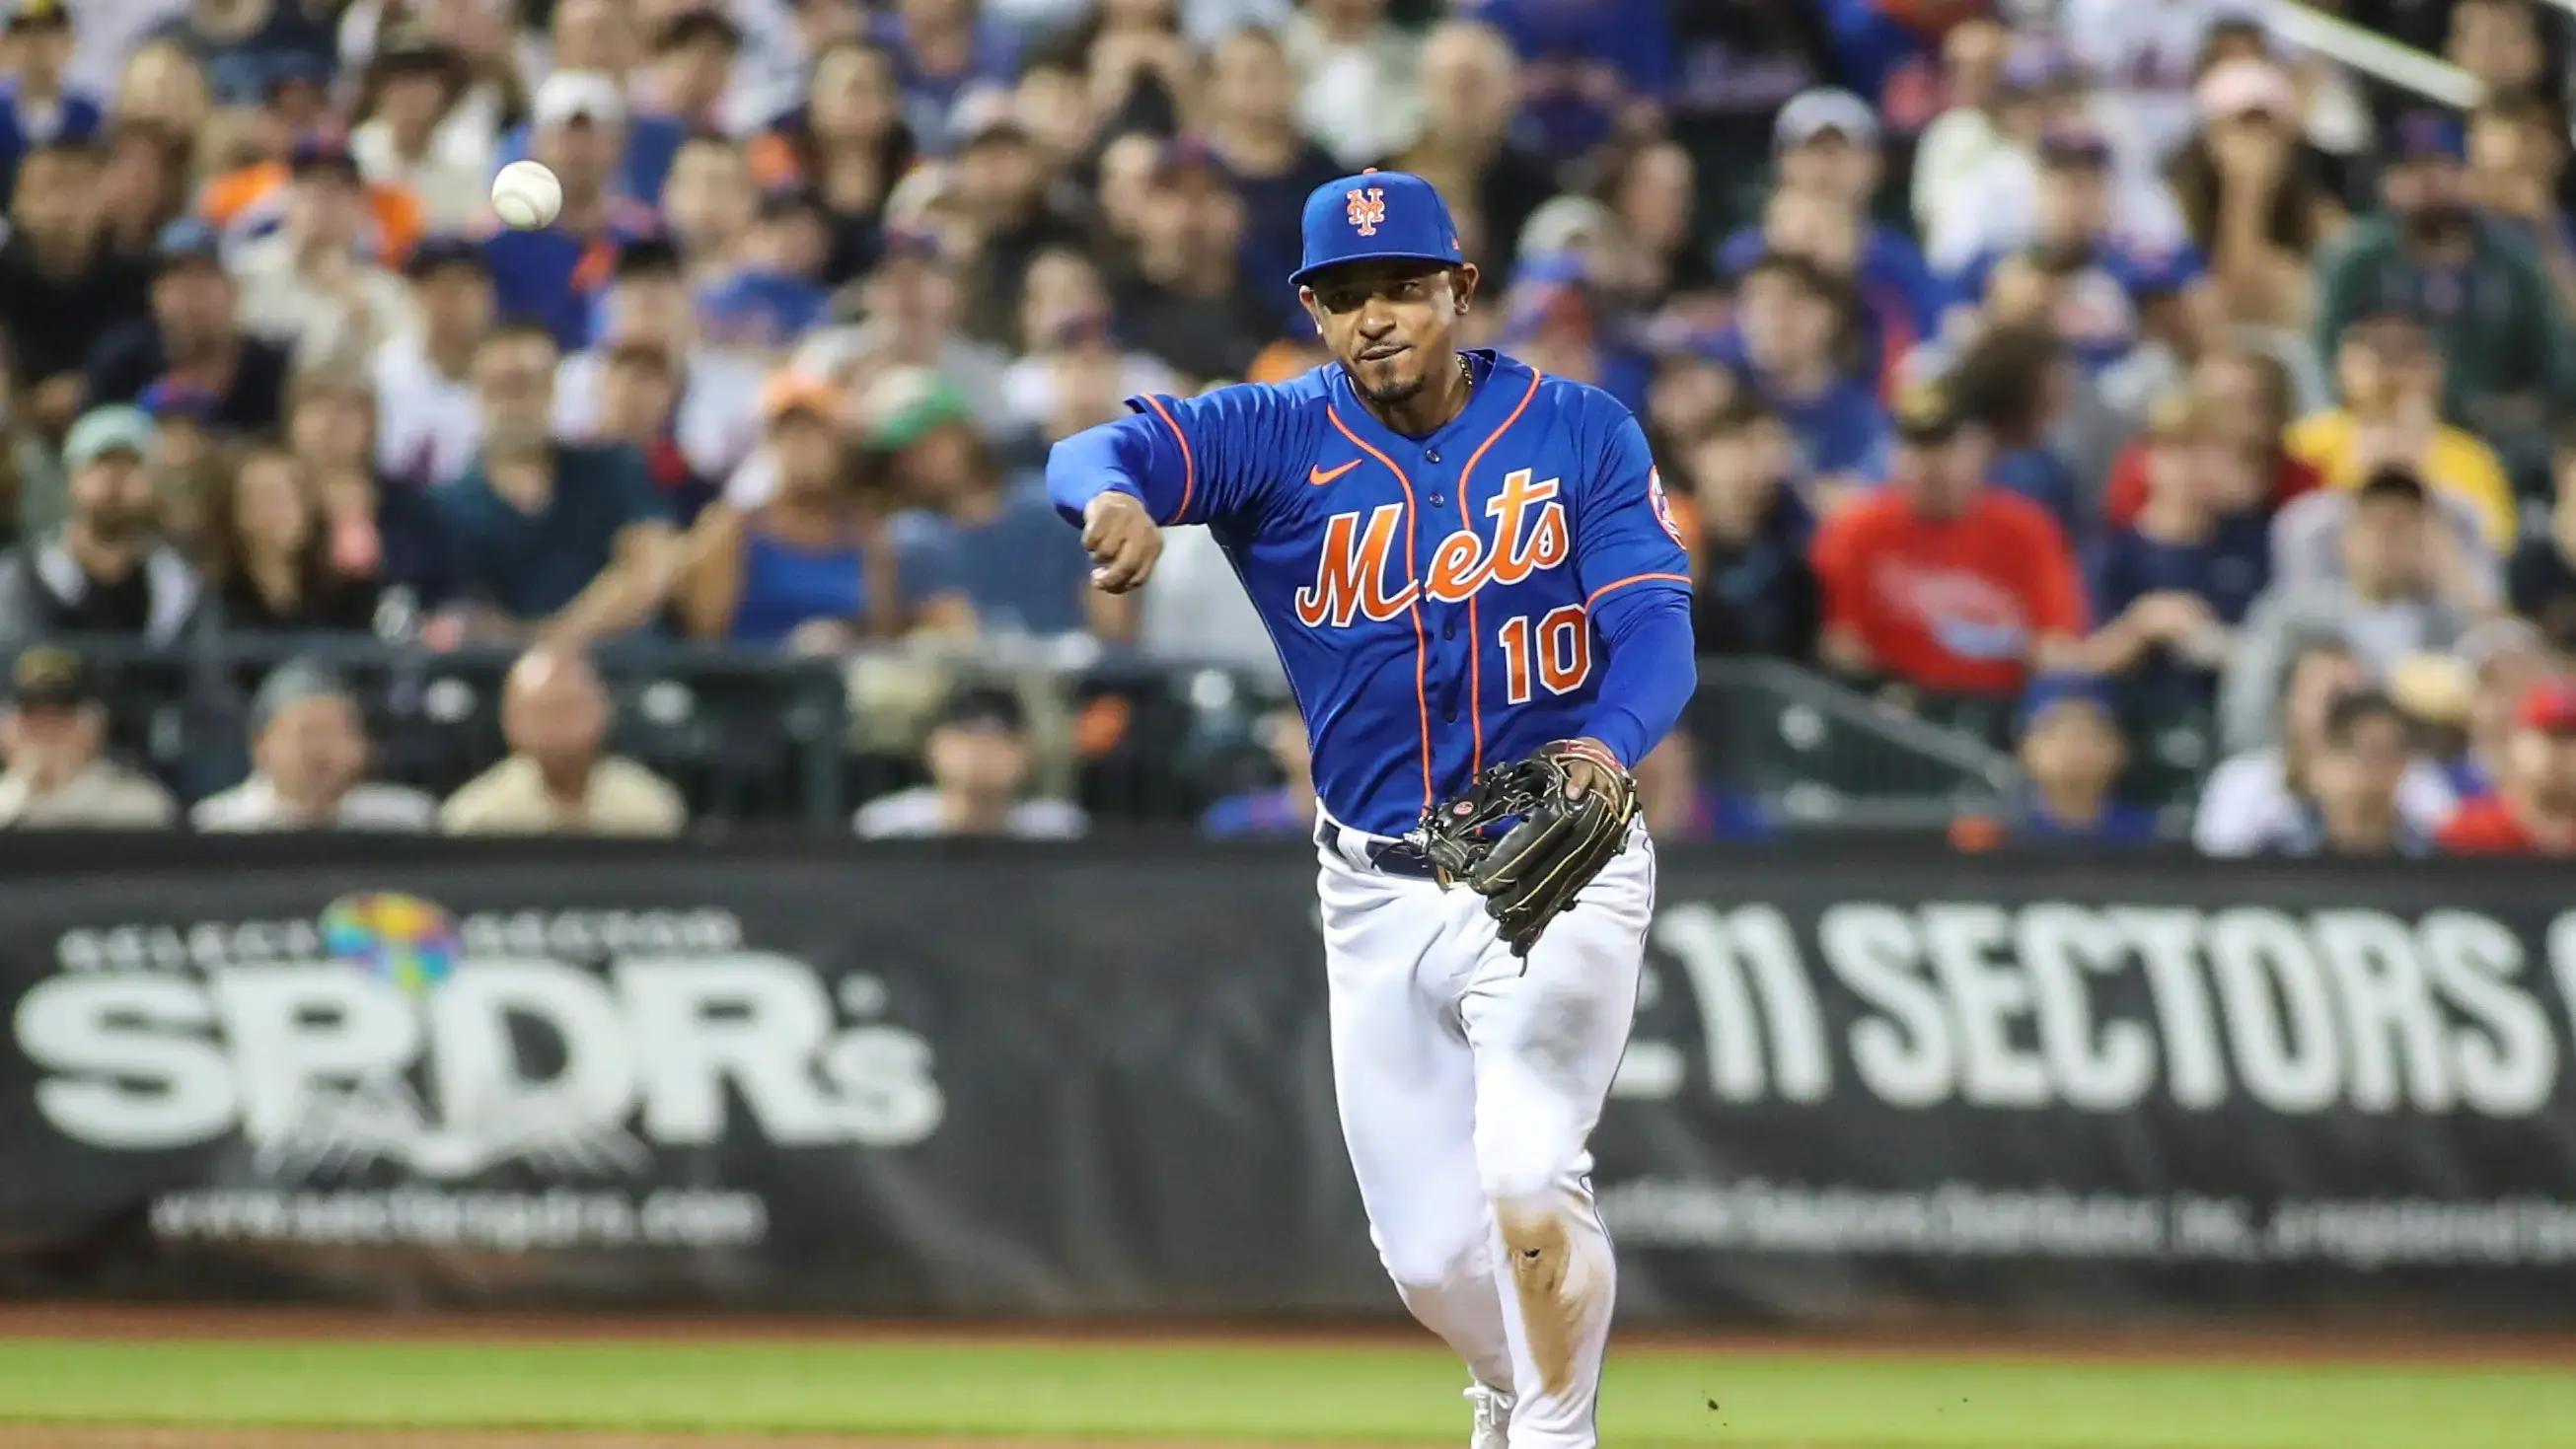 May 29, 2022; New York City, New York, USA; New York Mets third baseman Eduardo Escobar (10) makes a running throw for an assist in the fourth inning against the Philadelphia Phillies at Citi Field. / Wendell Cruz-USA TODAY Sports